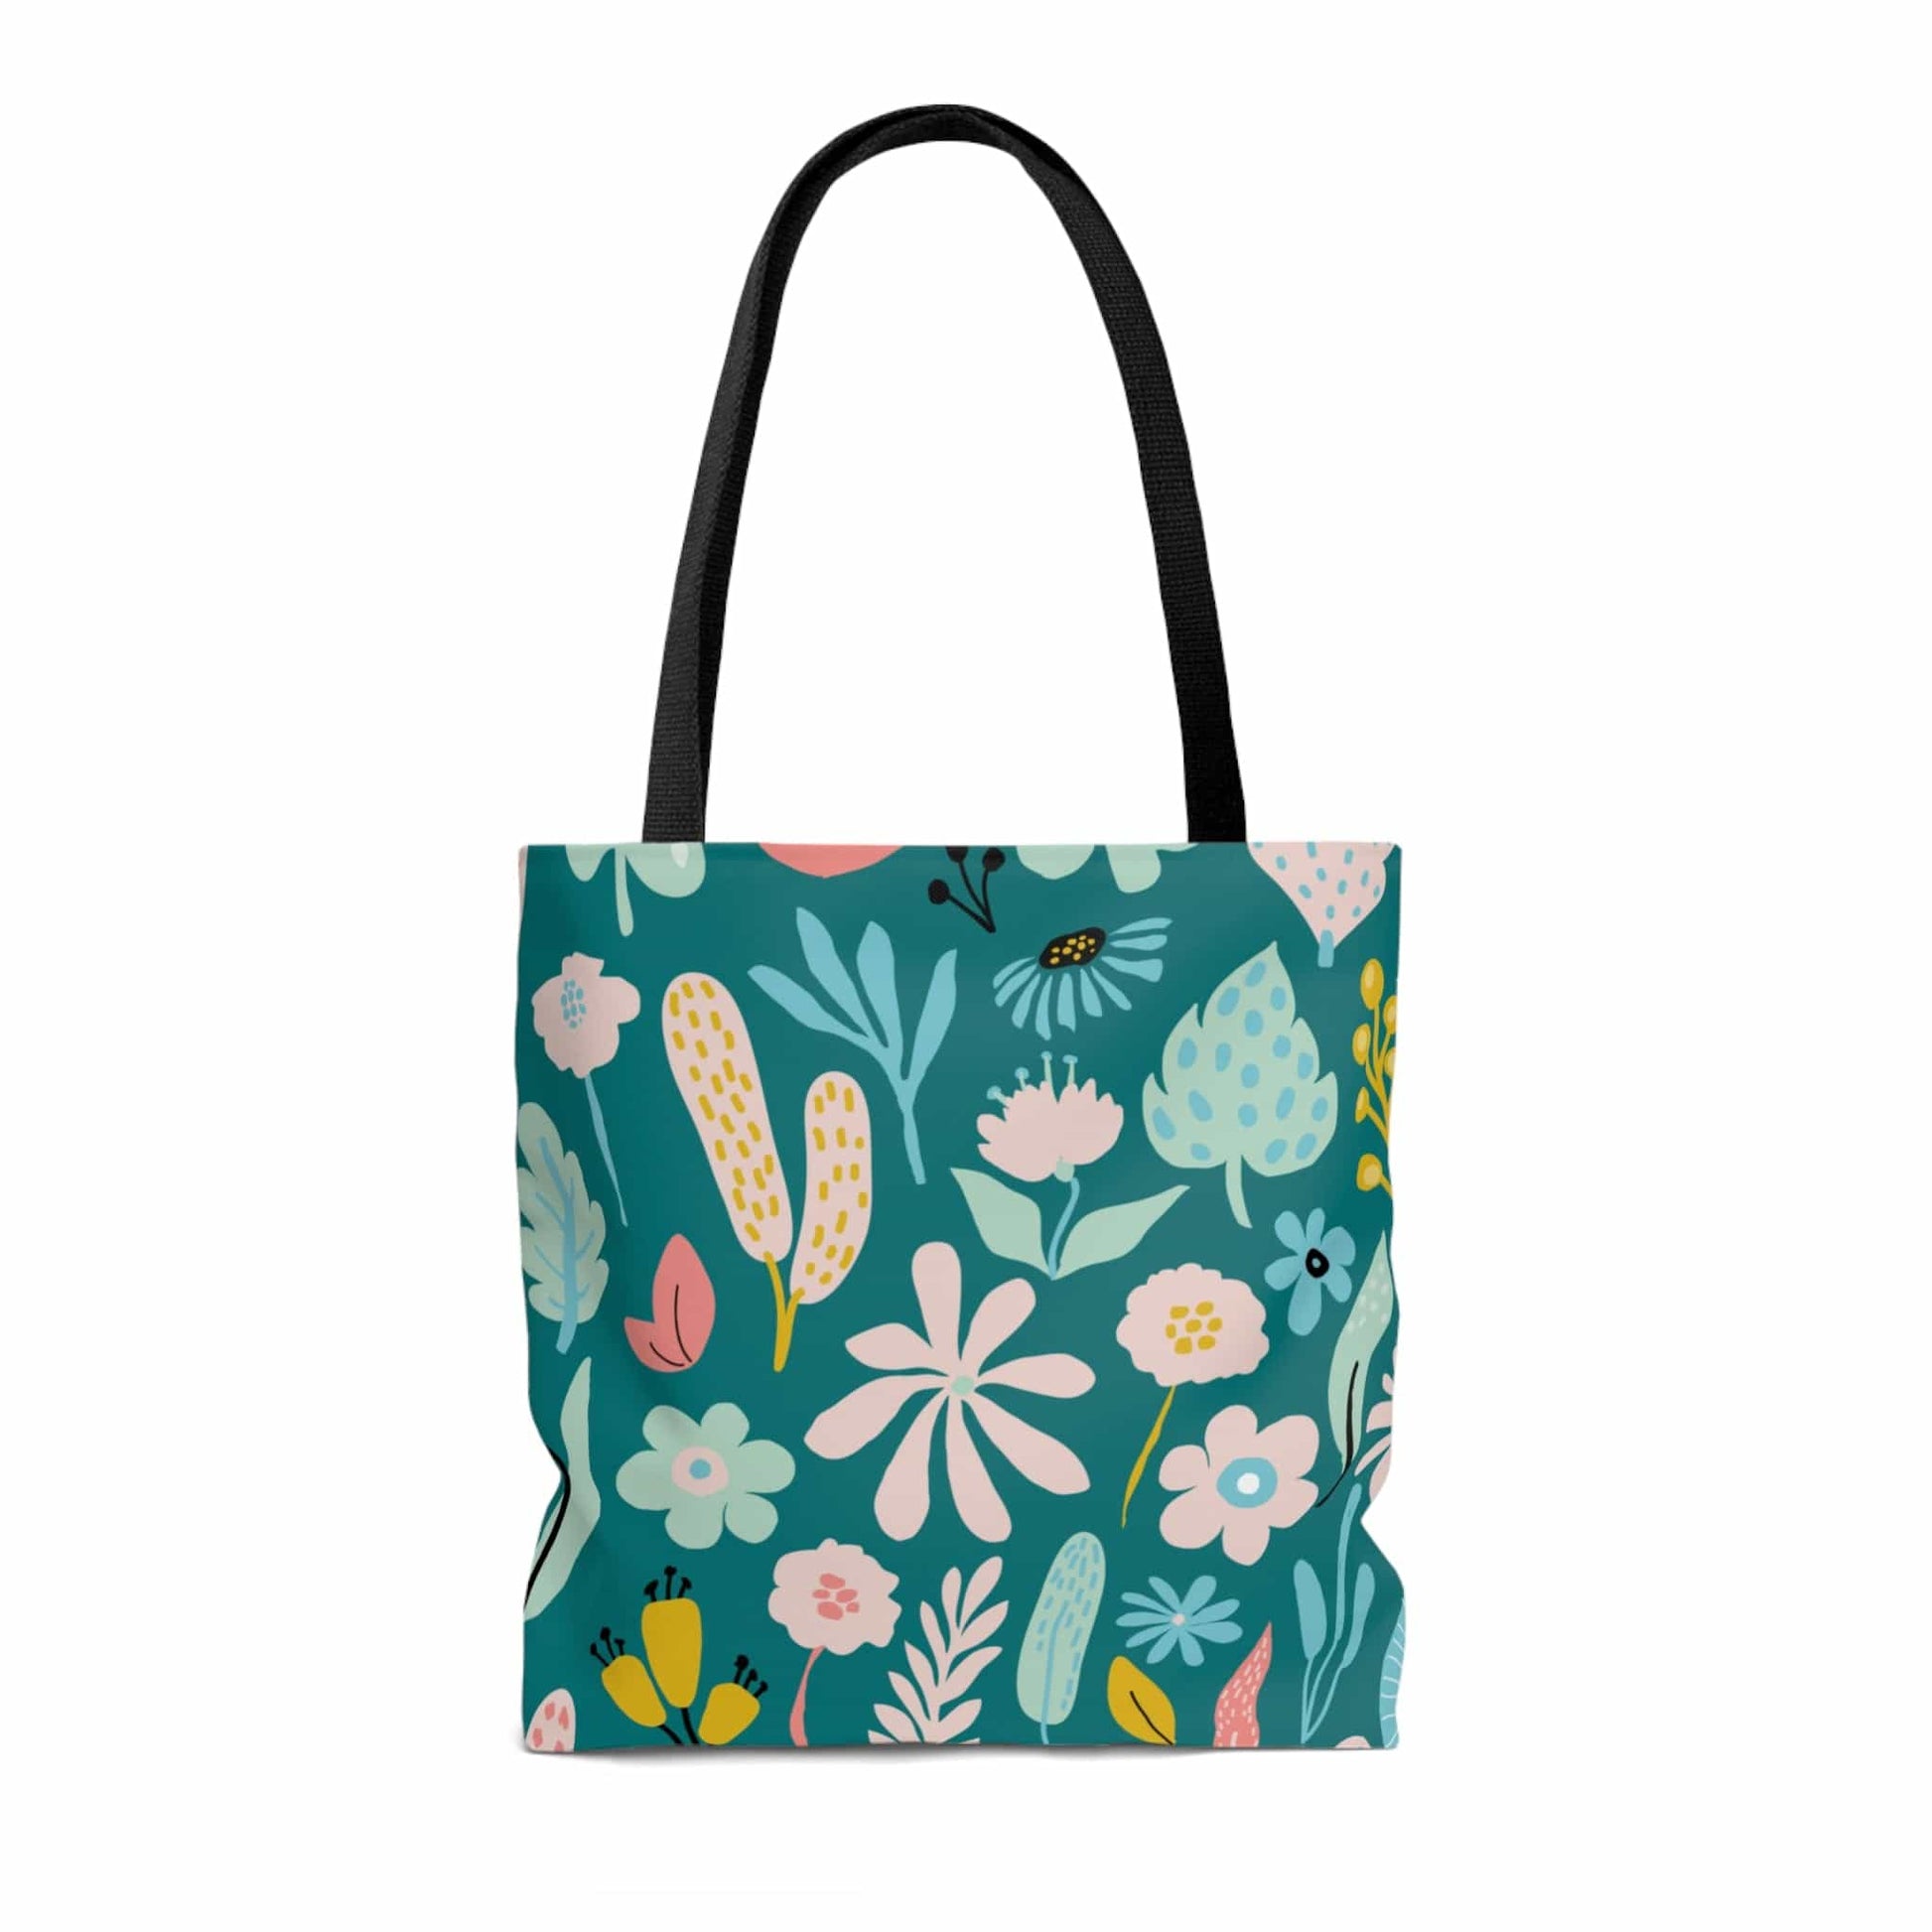 Printify Headed to the Yarn Store Tote Bags